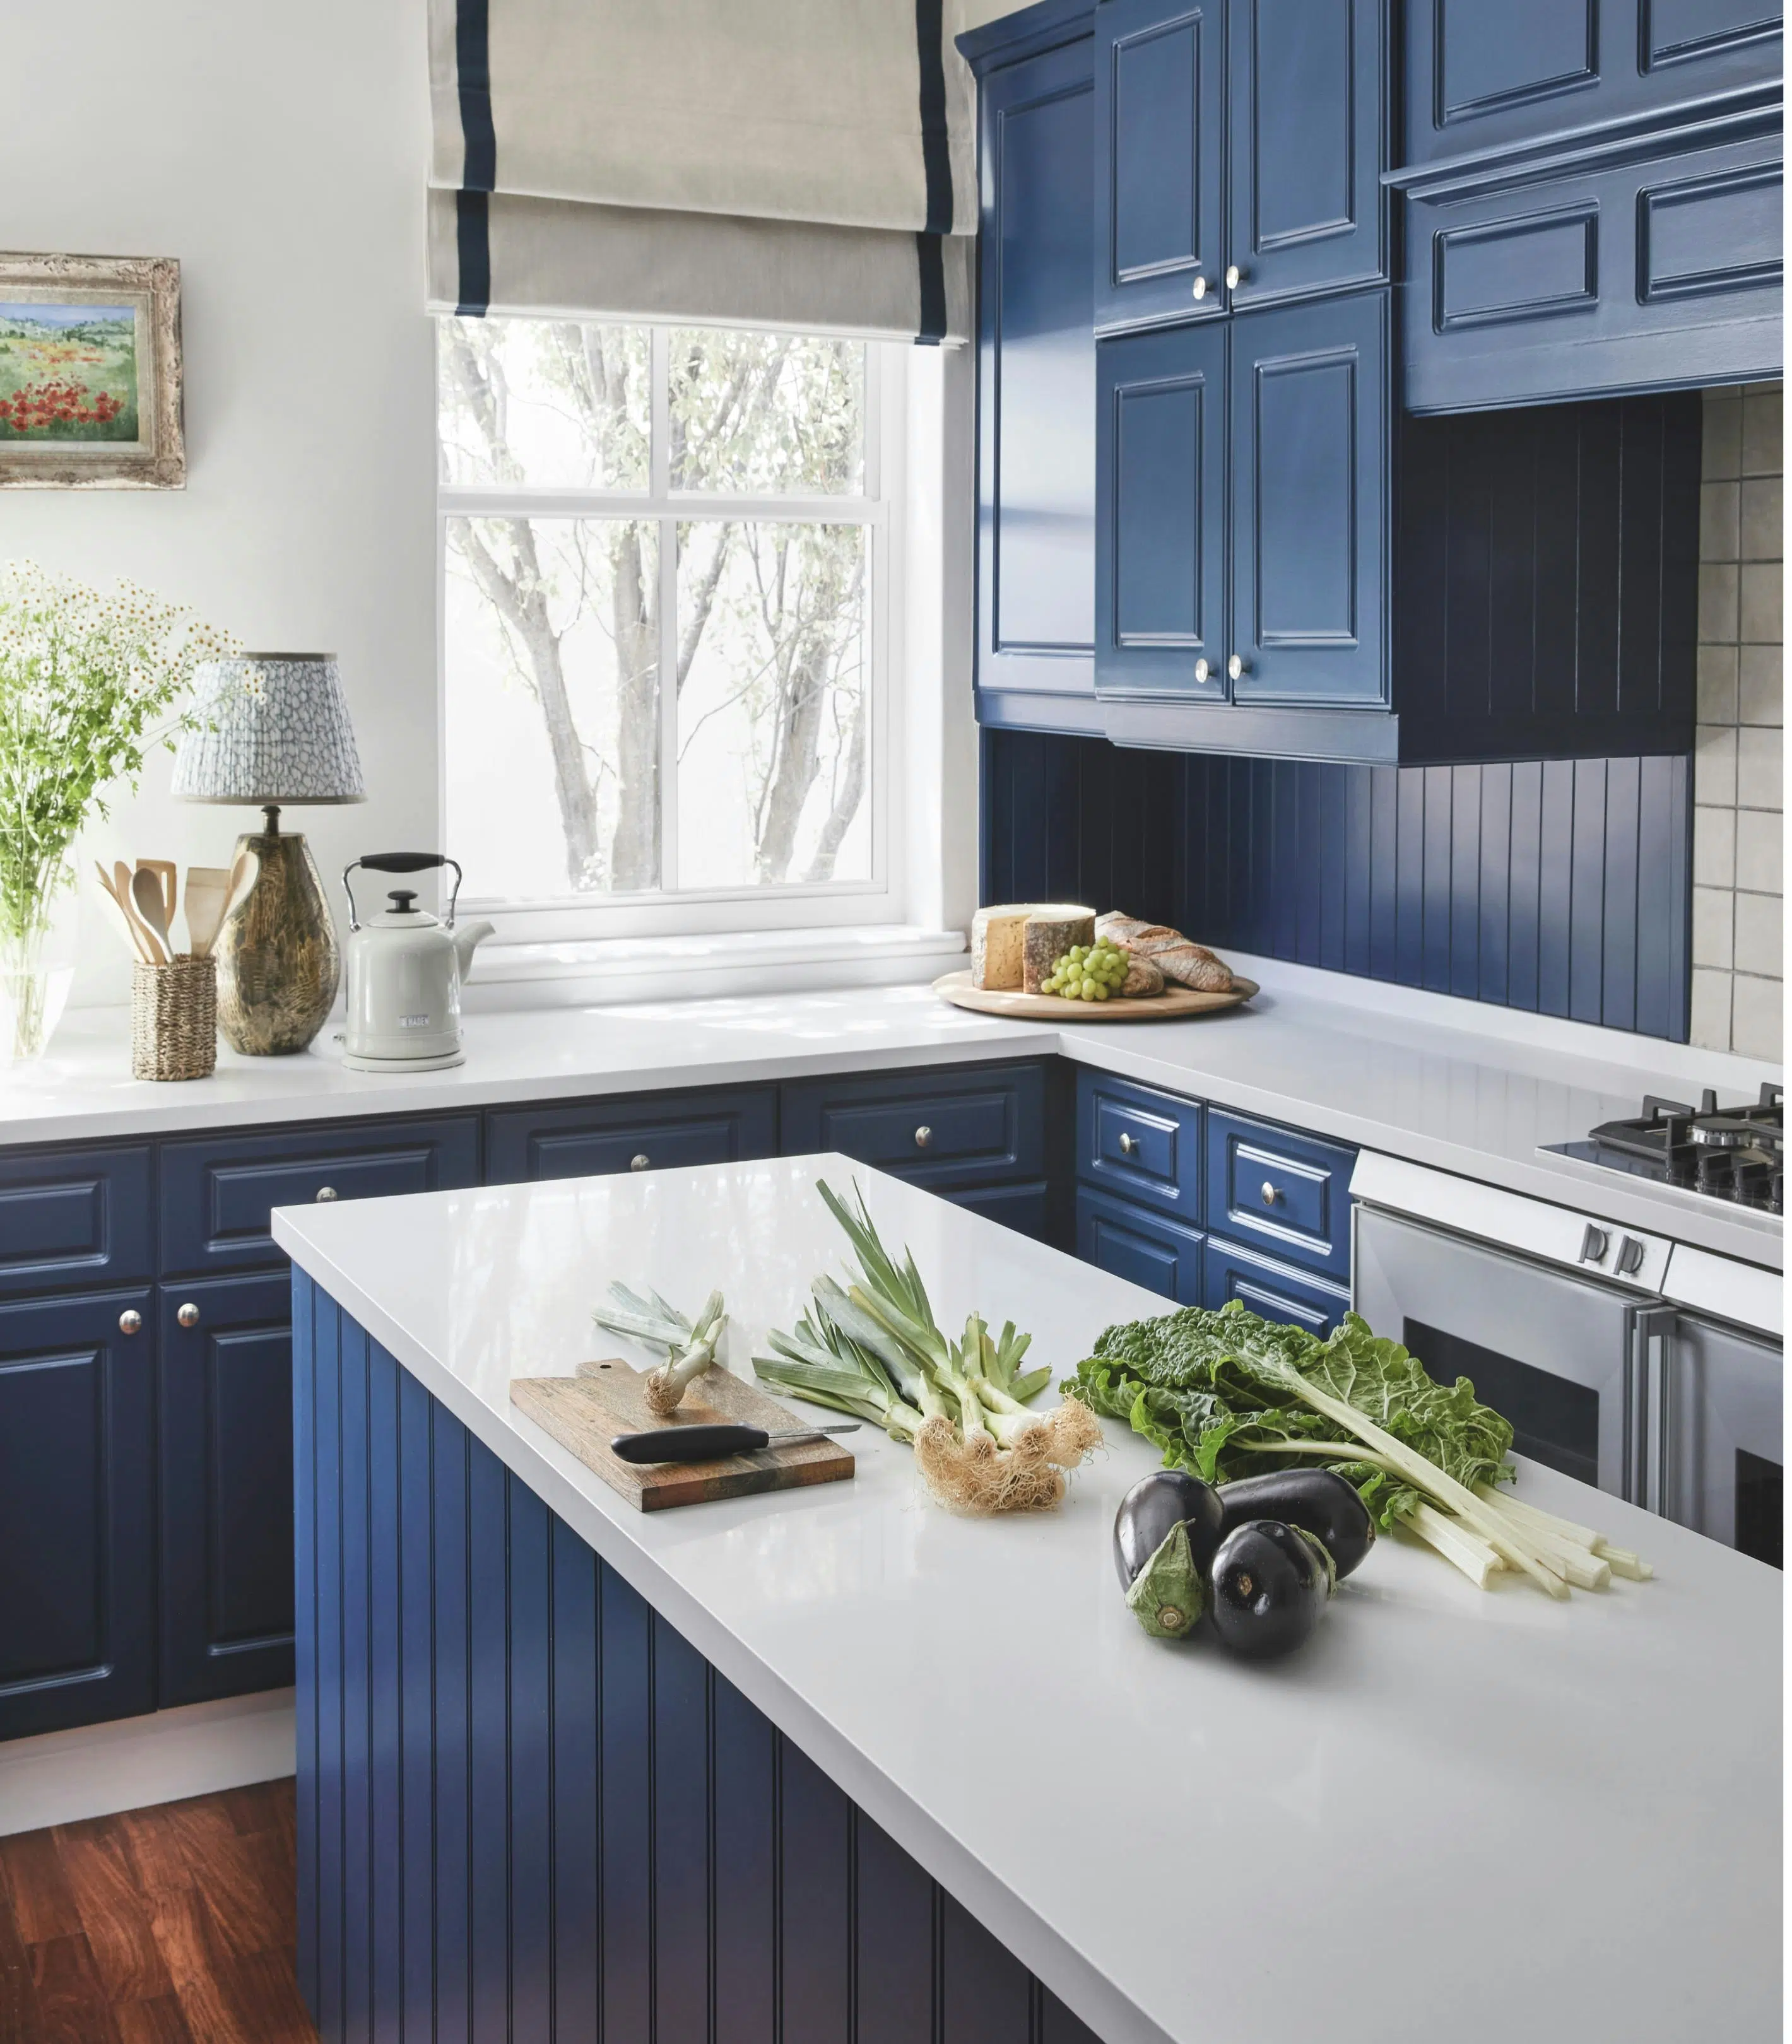 A kitchen with deep blue cabinetry, a window with a view of the trees outside and a kitchen island with vegetables on top.